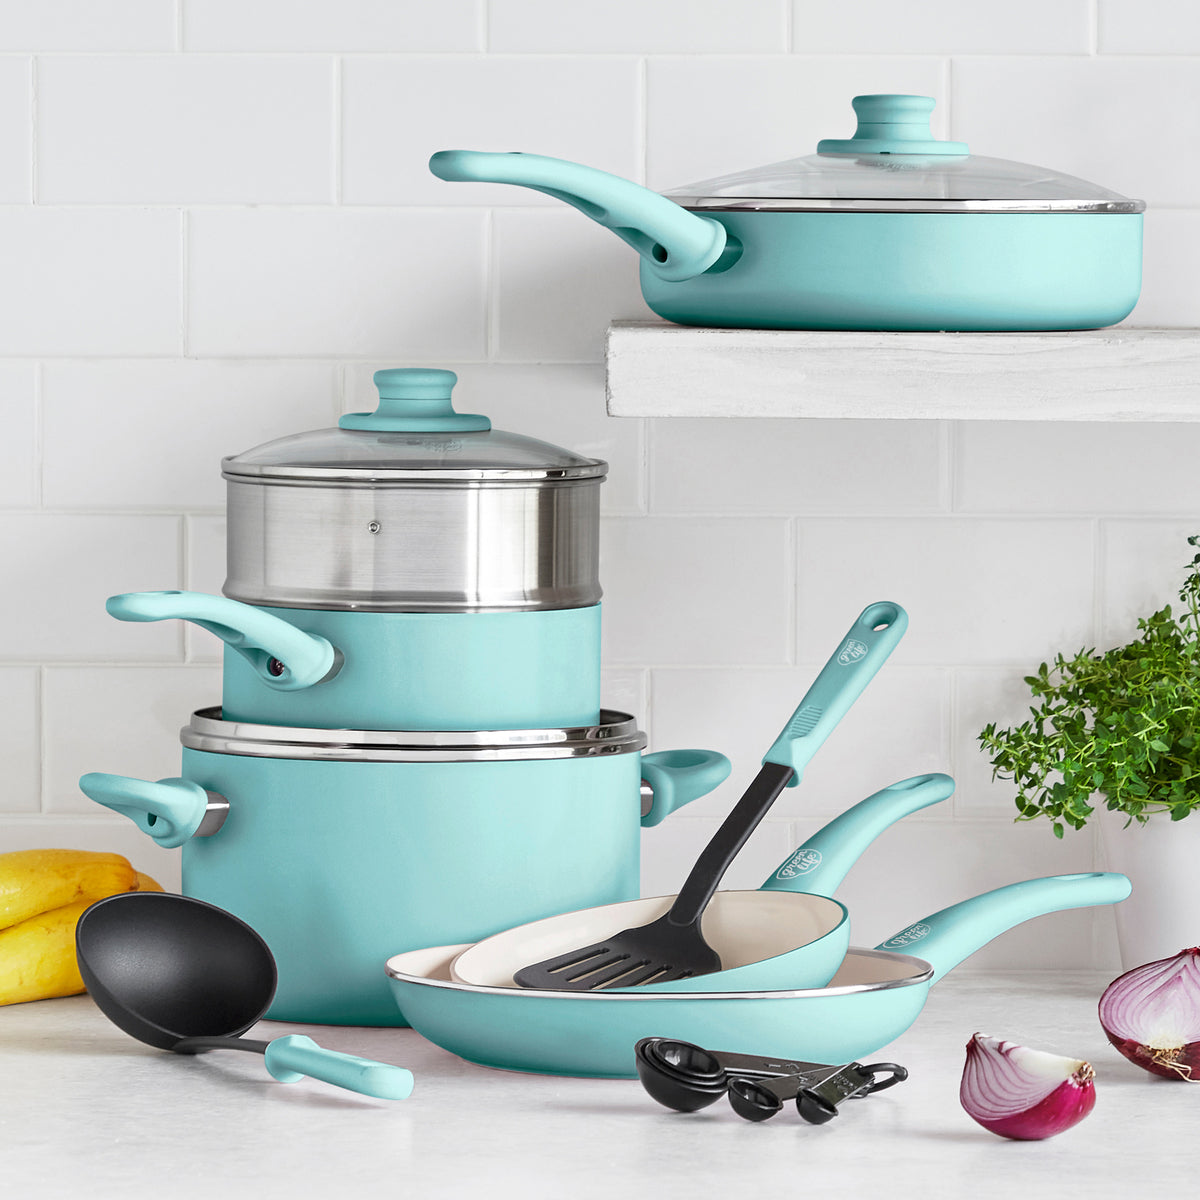 GreenLife Artisan Healthy Ceramic Nonstick, 12 Piece Cookware Pots and Pans Set in Turquoise